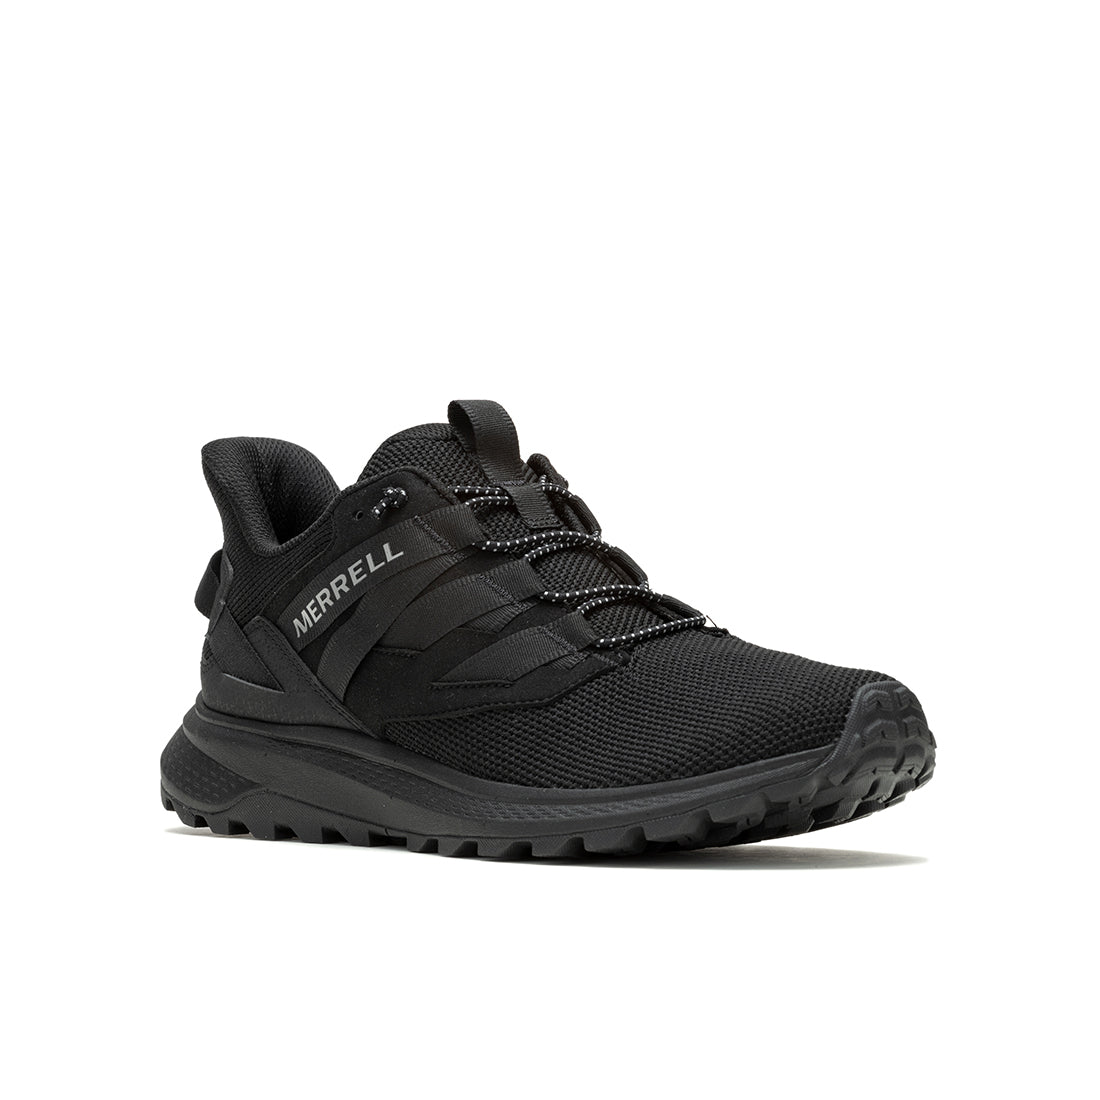 Dash Bungee-Triple Black Mens Casual Shoes | Merrell Online Store